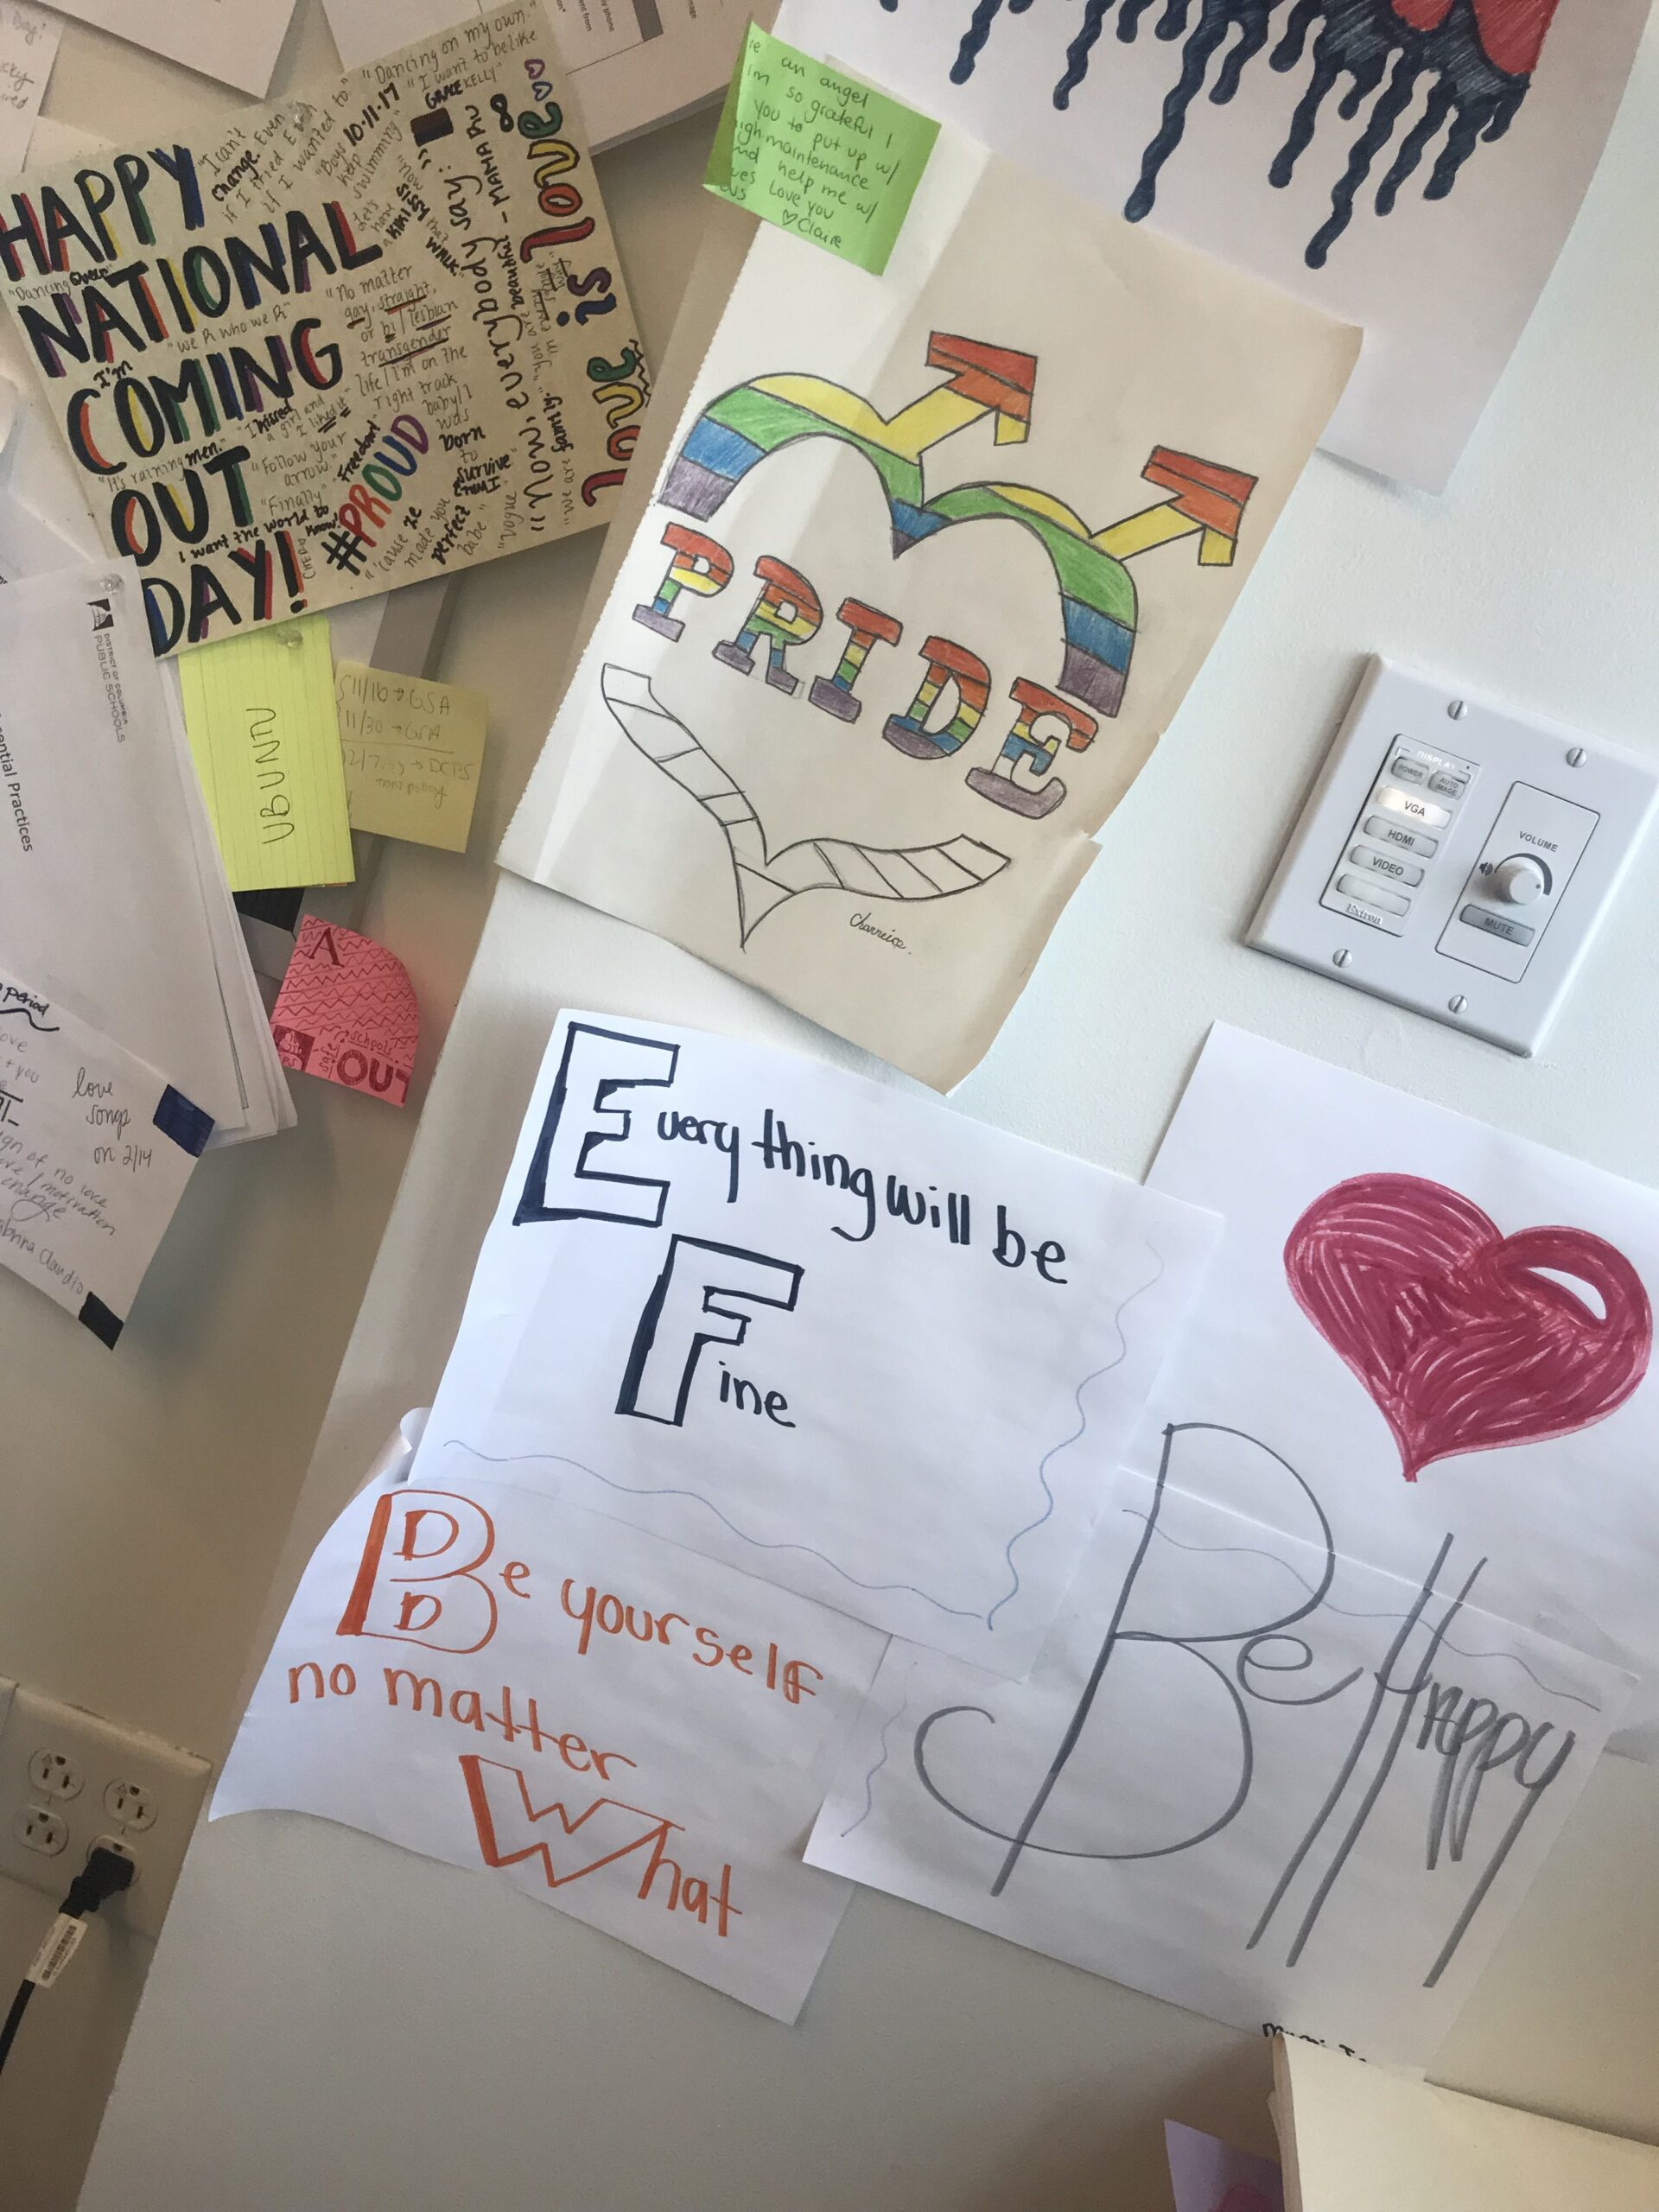 poster made by a student for a teacher which reads "Everything with be Fine / Be yourself no matter What"